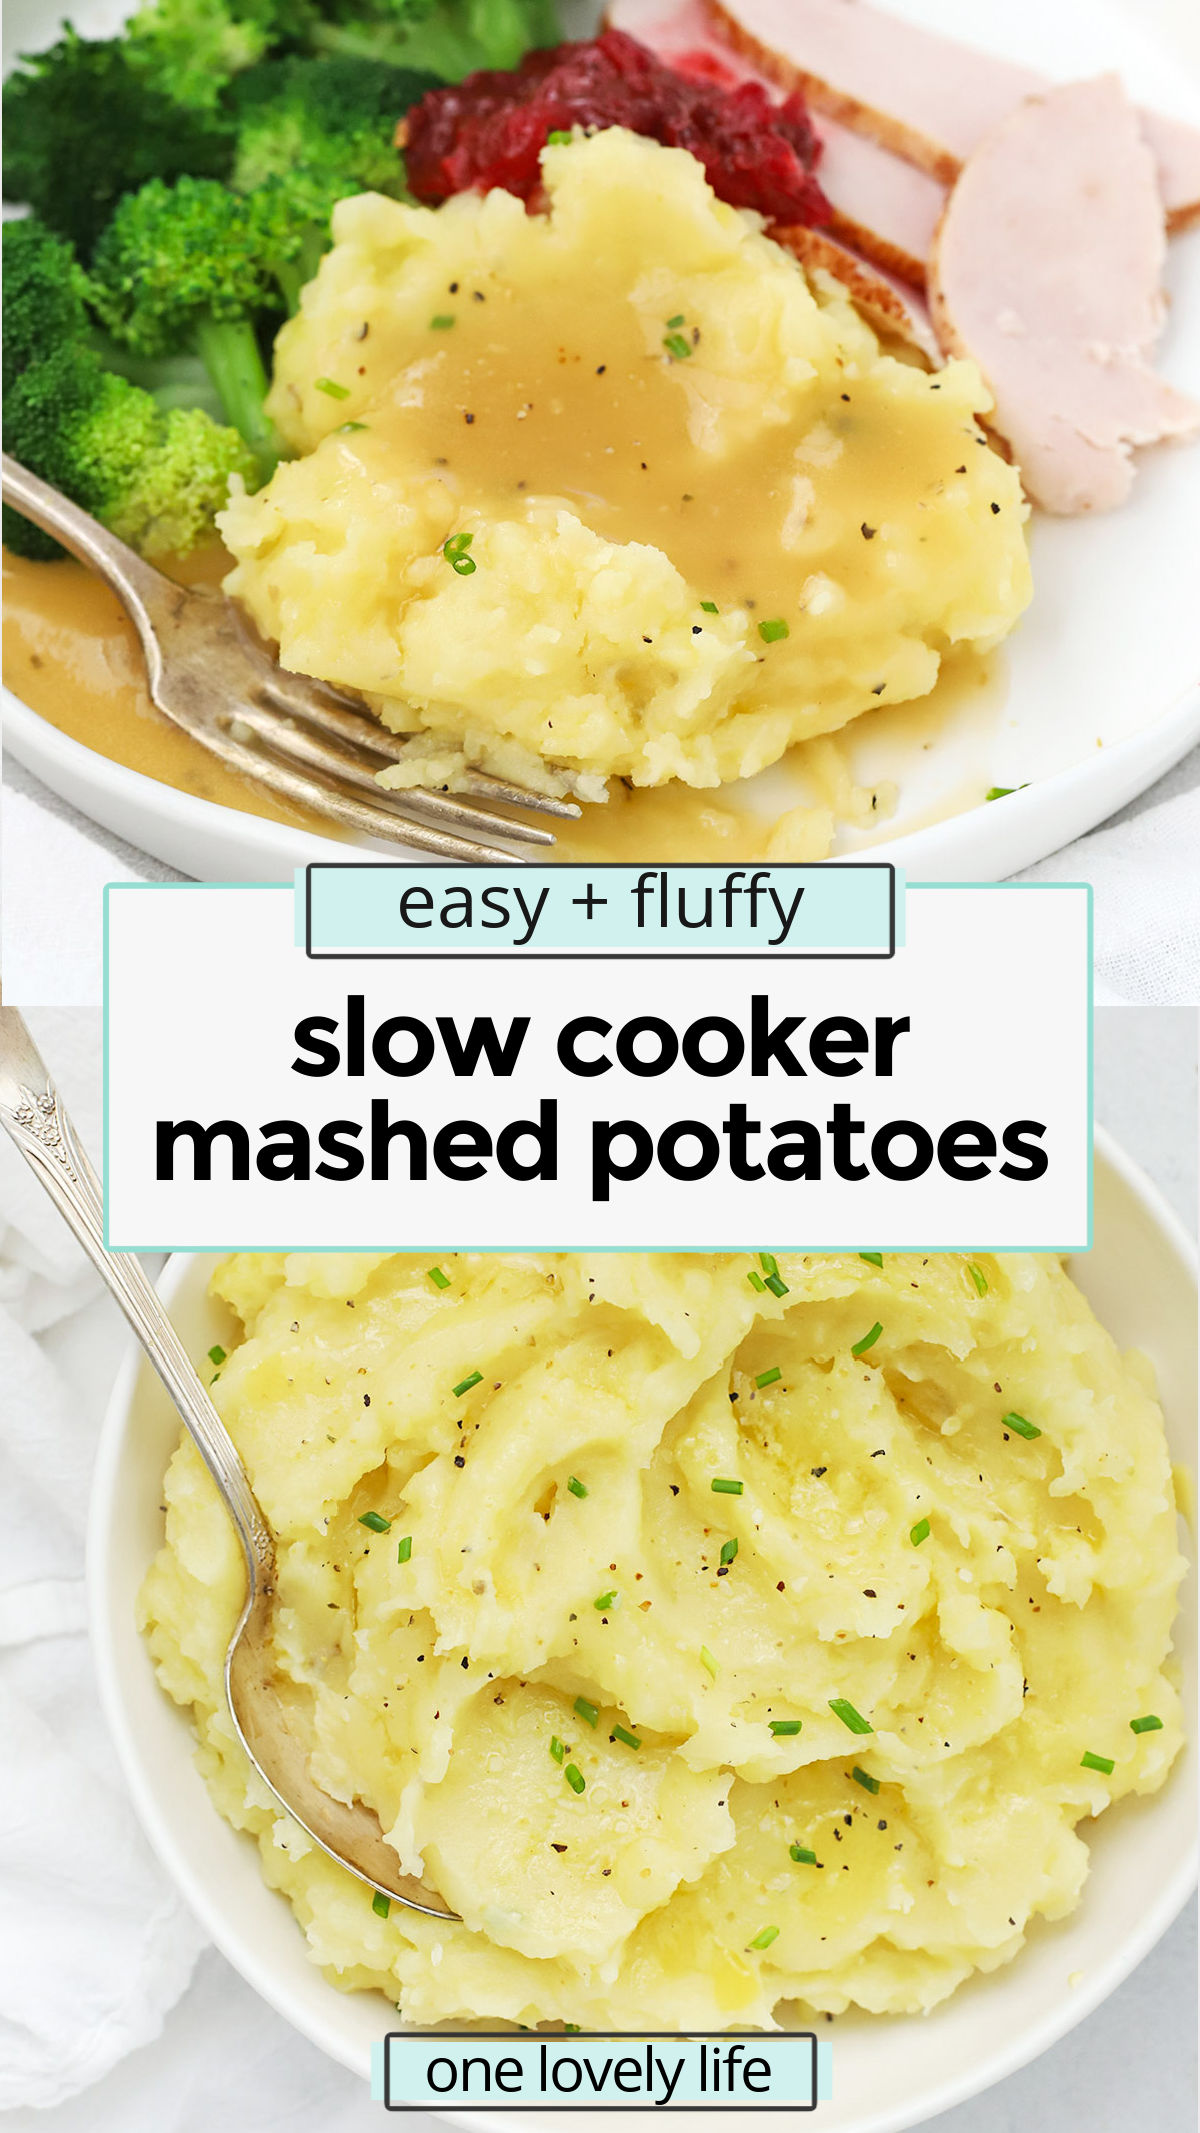 Slow Cooker Mashed Potatoes - This Crock pot mashed potatoes recipes is the EASIEST way to make this classic side dish! / crockpot mashed potatoes recipe / easy mashed potatoes / mashed potatoes in the slow cooker / mashed potatoes in the crock pot / Thanksgiving slow cooker recipes / Christmas slow cooker recipes / slow cooker side dish / gluten-free Thanksgiving